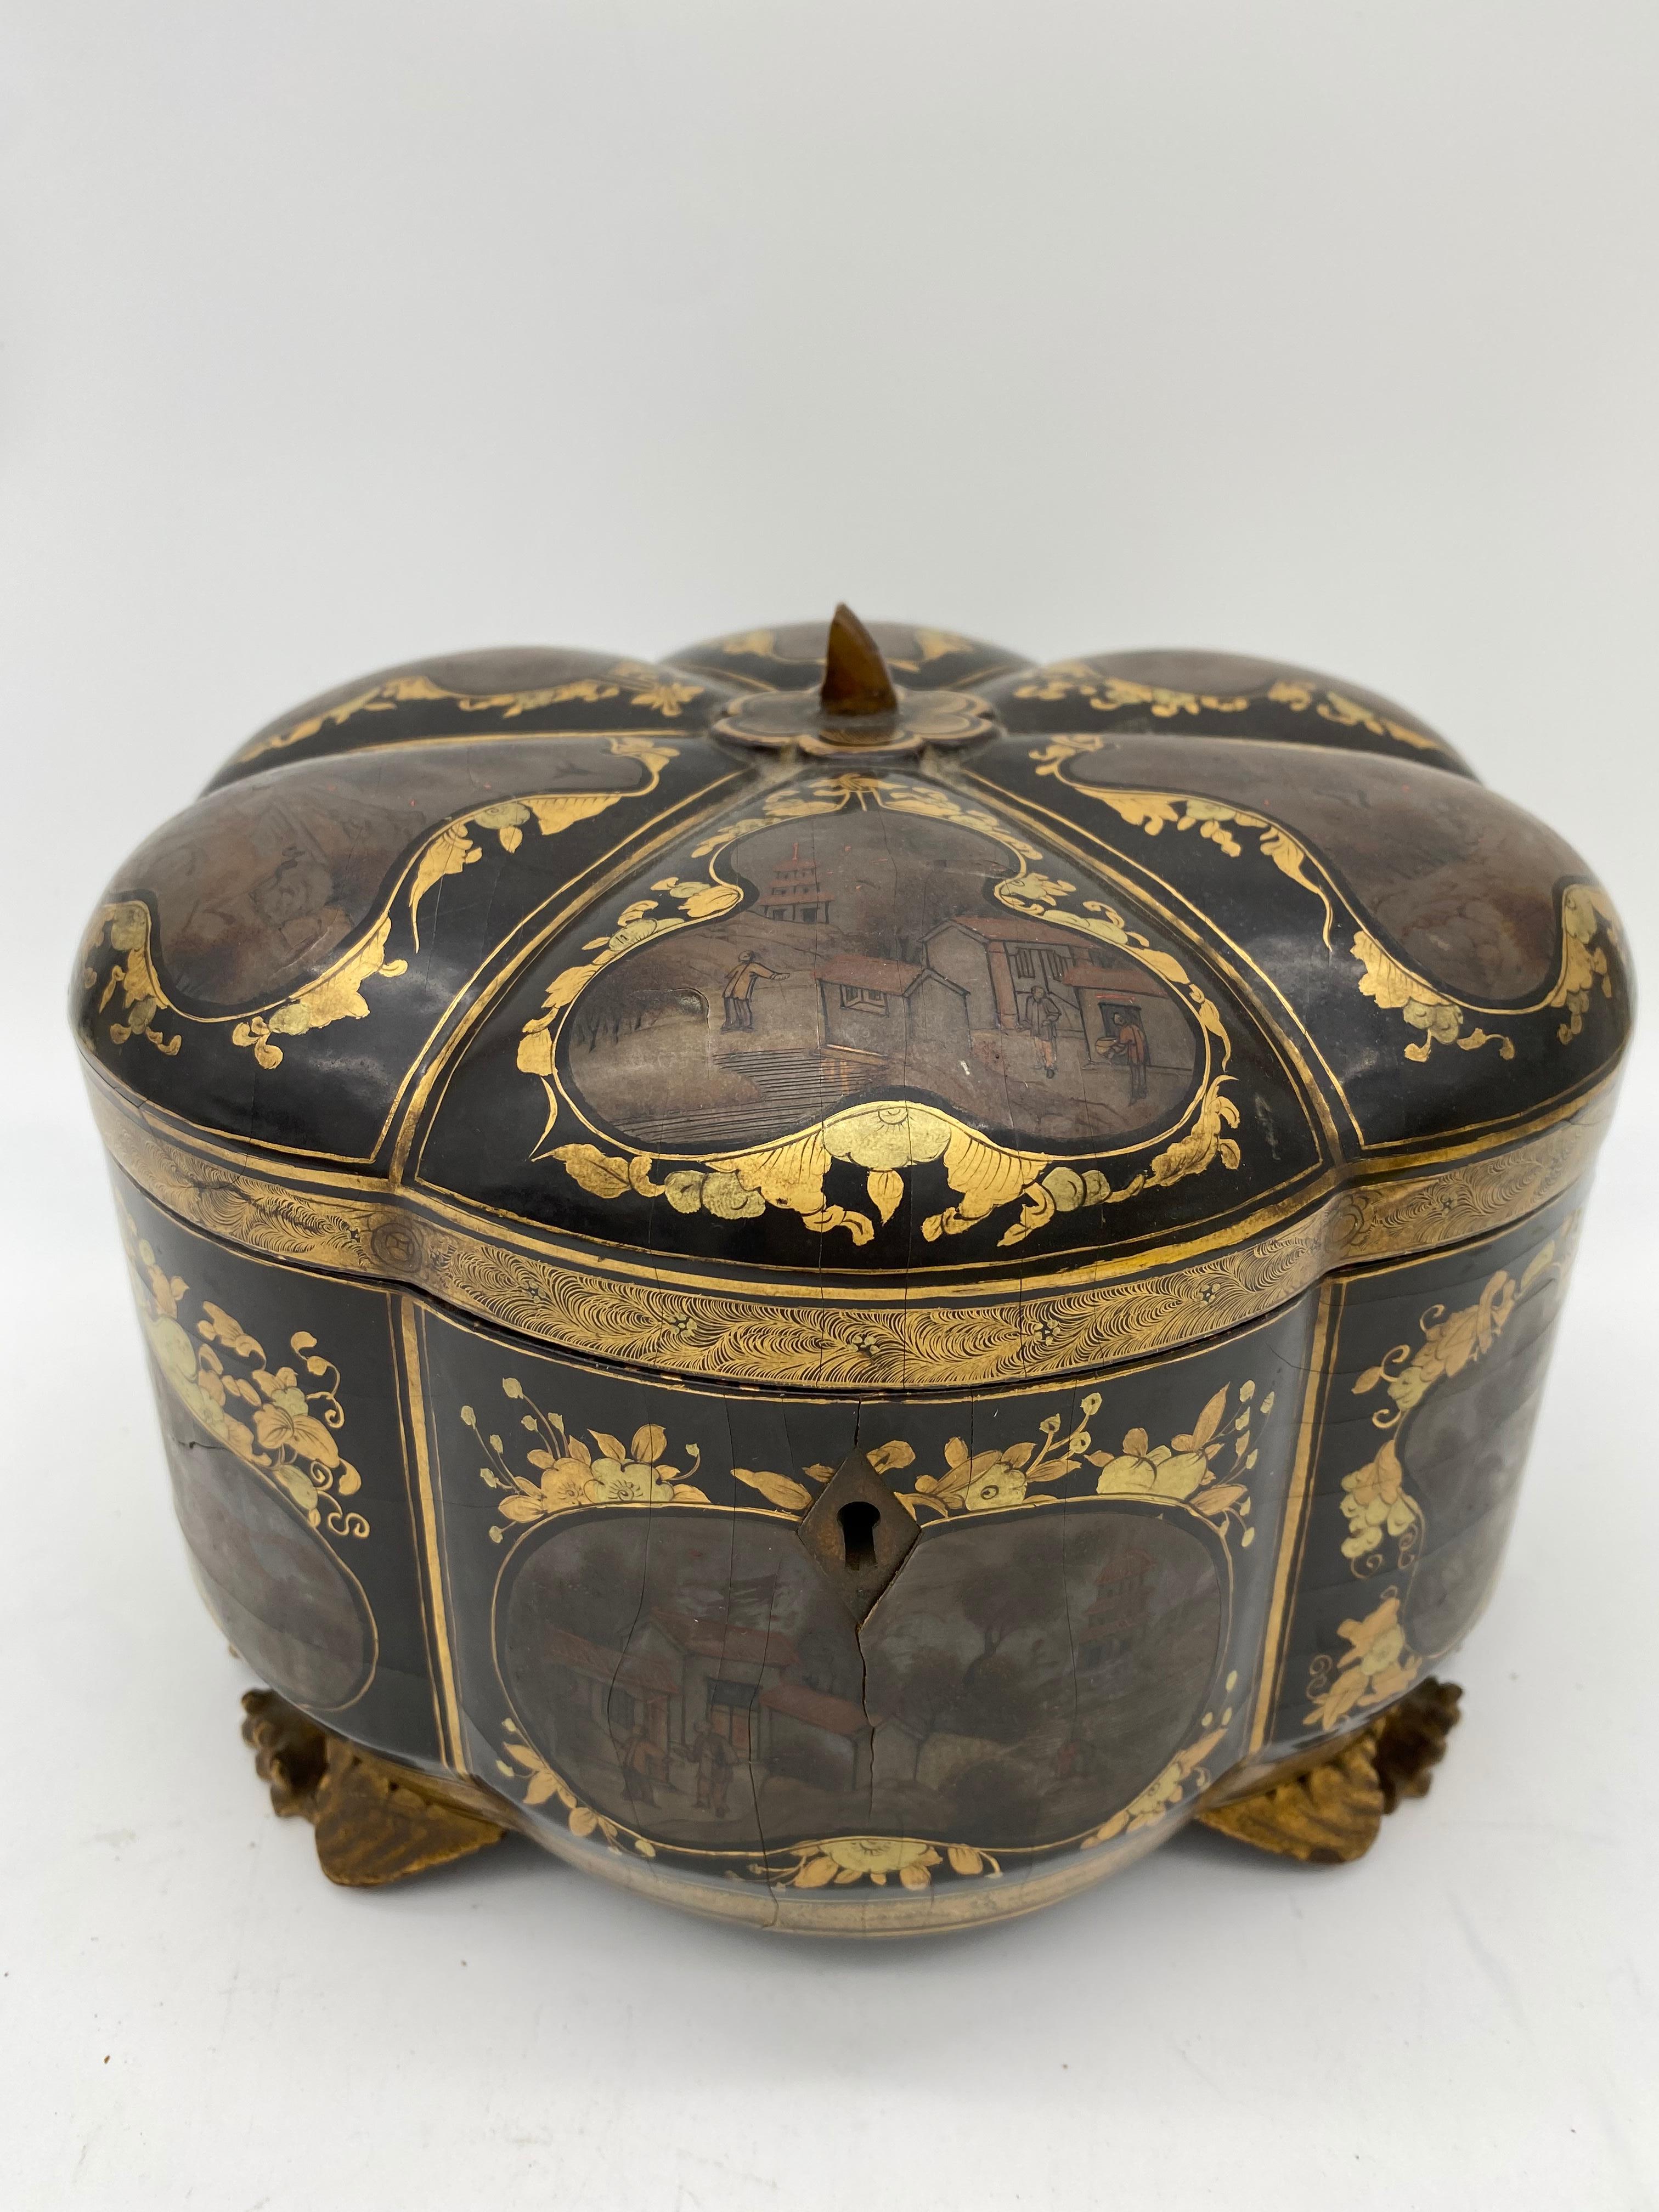 19th Century a Unique Gilt Chinese Lacquer Tea Caddy For Sale 2